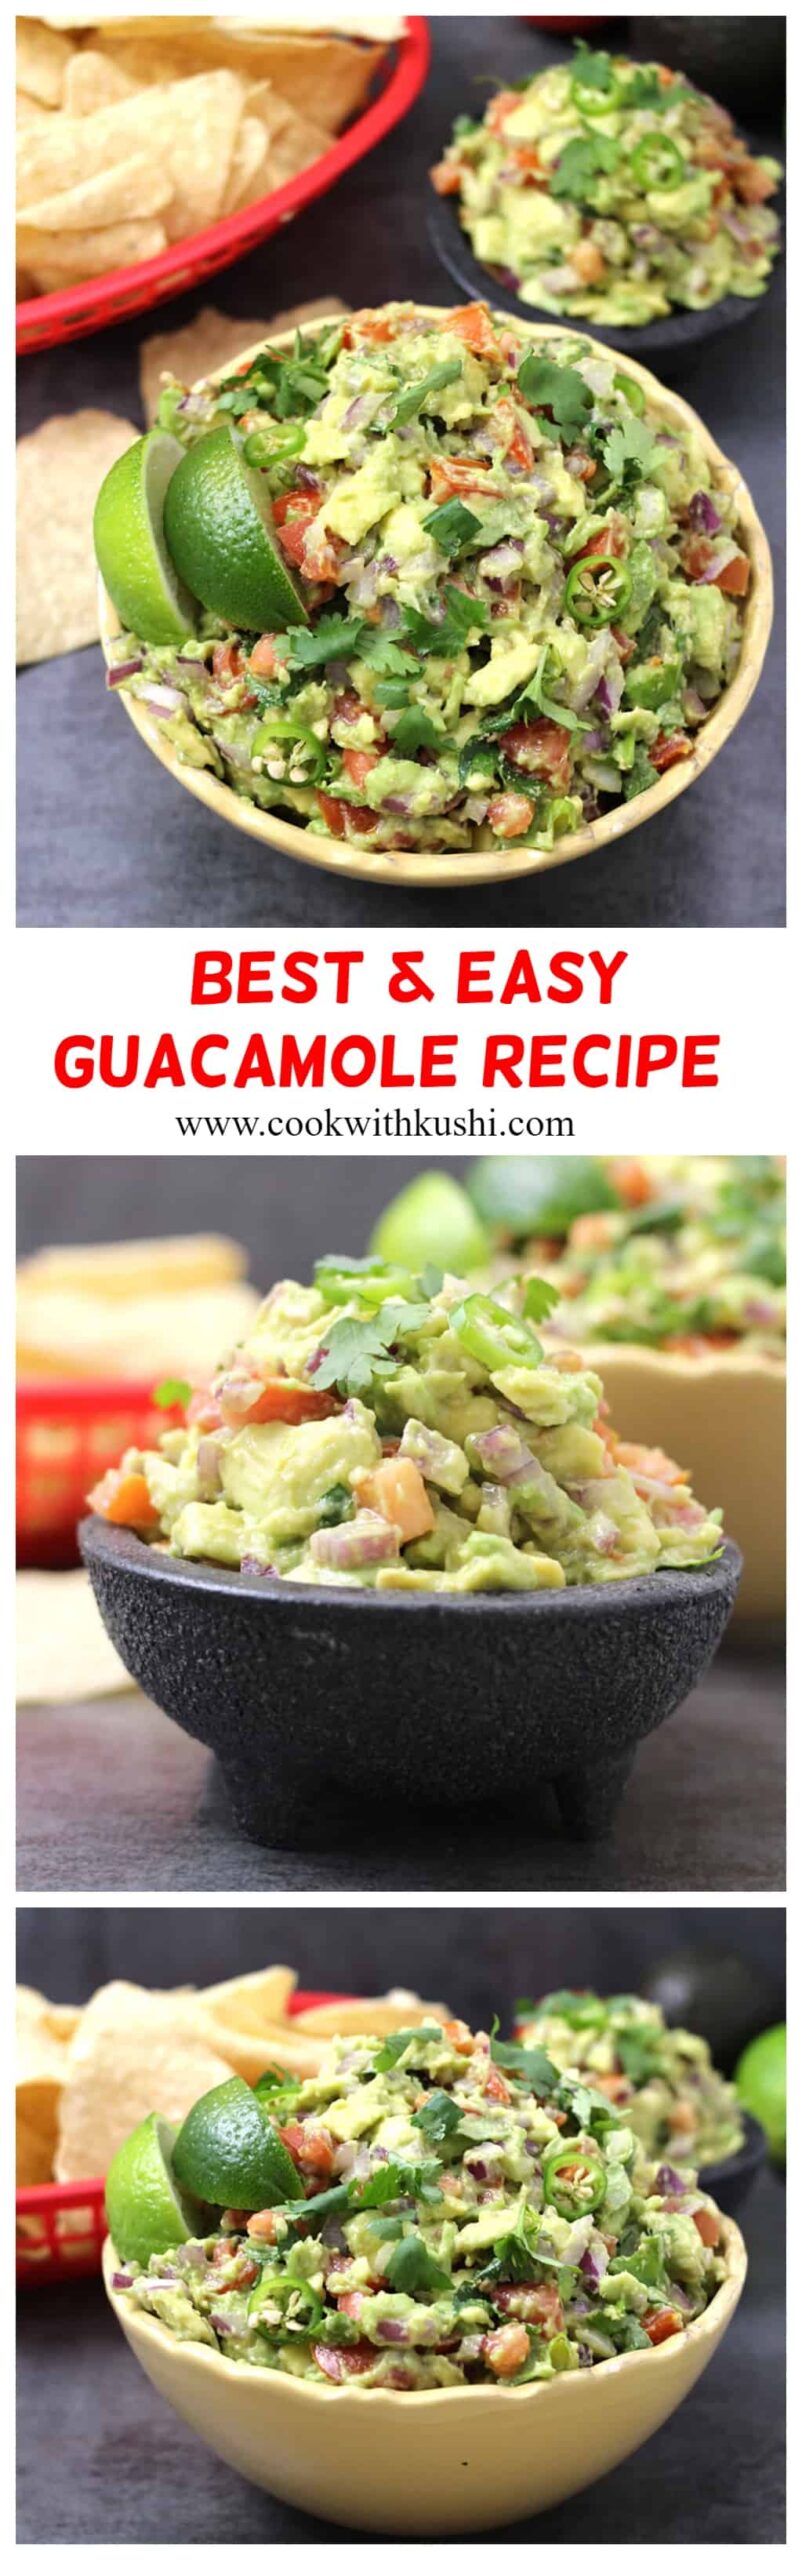 How to make best, simple, easy guacamole dip recipe #avocado #toast #salsa #chips